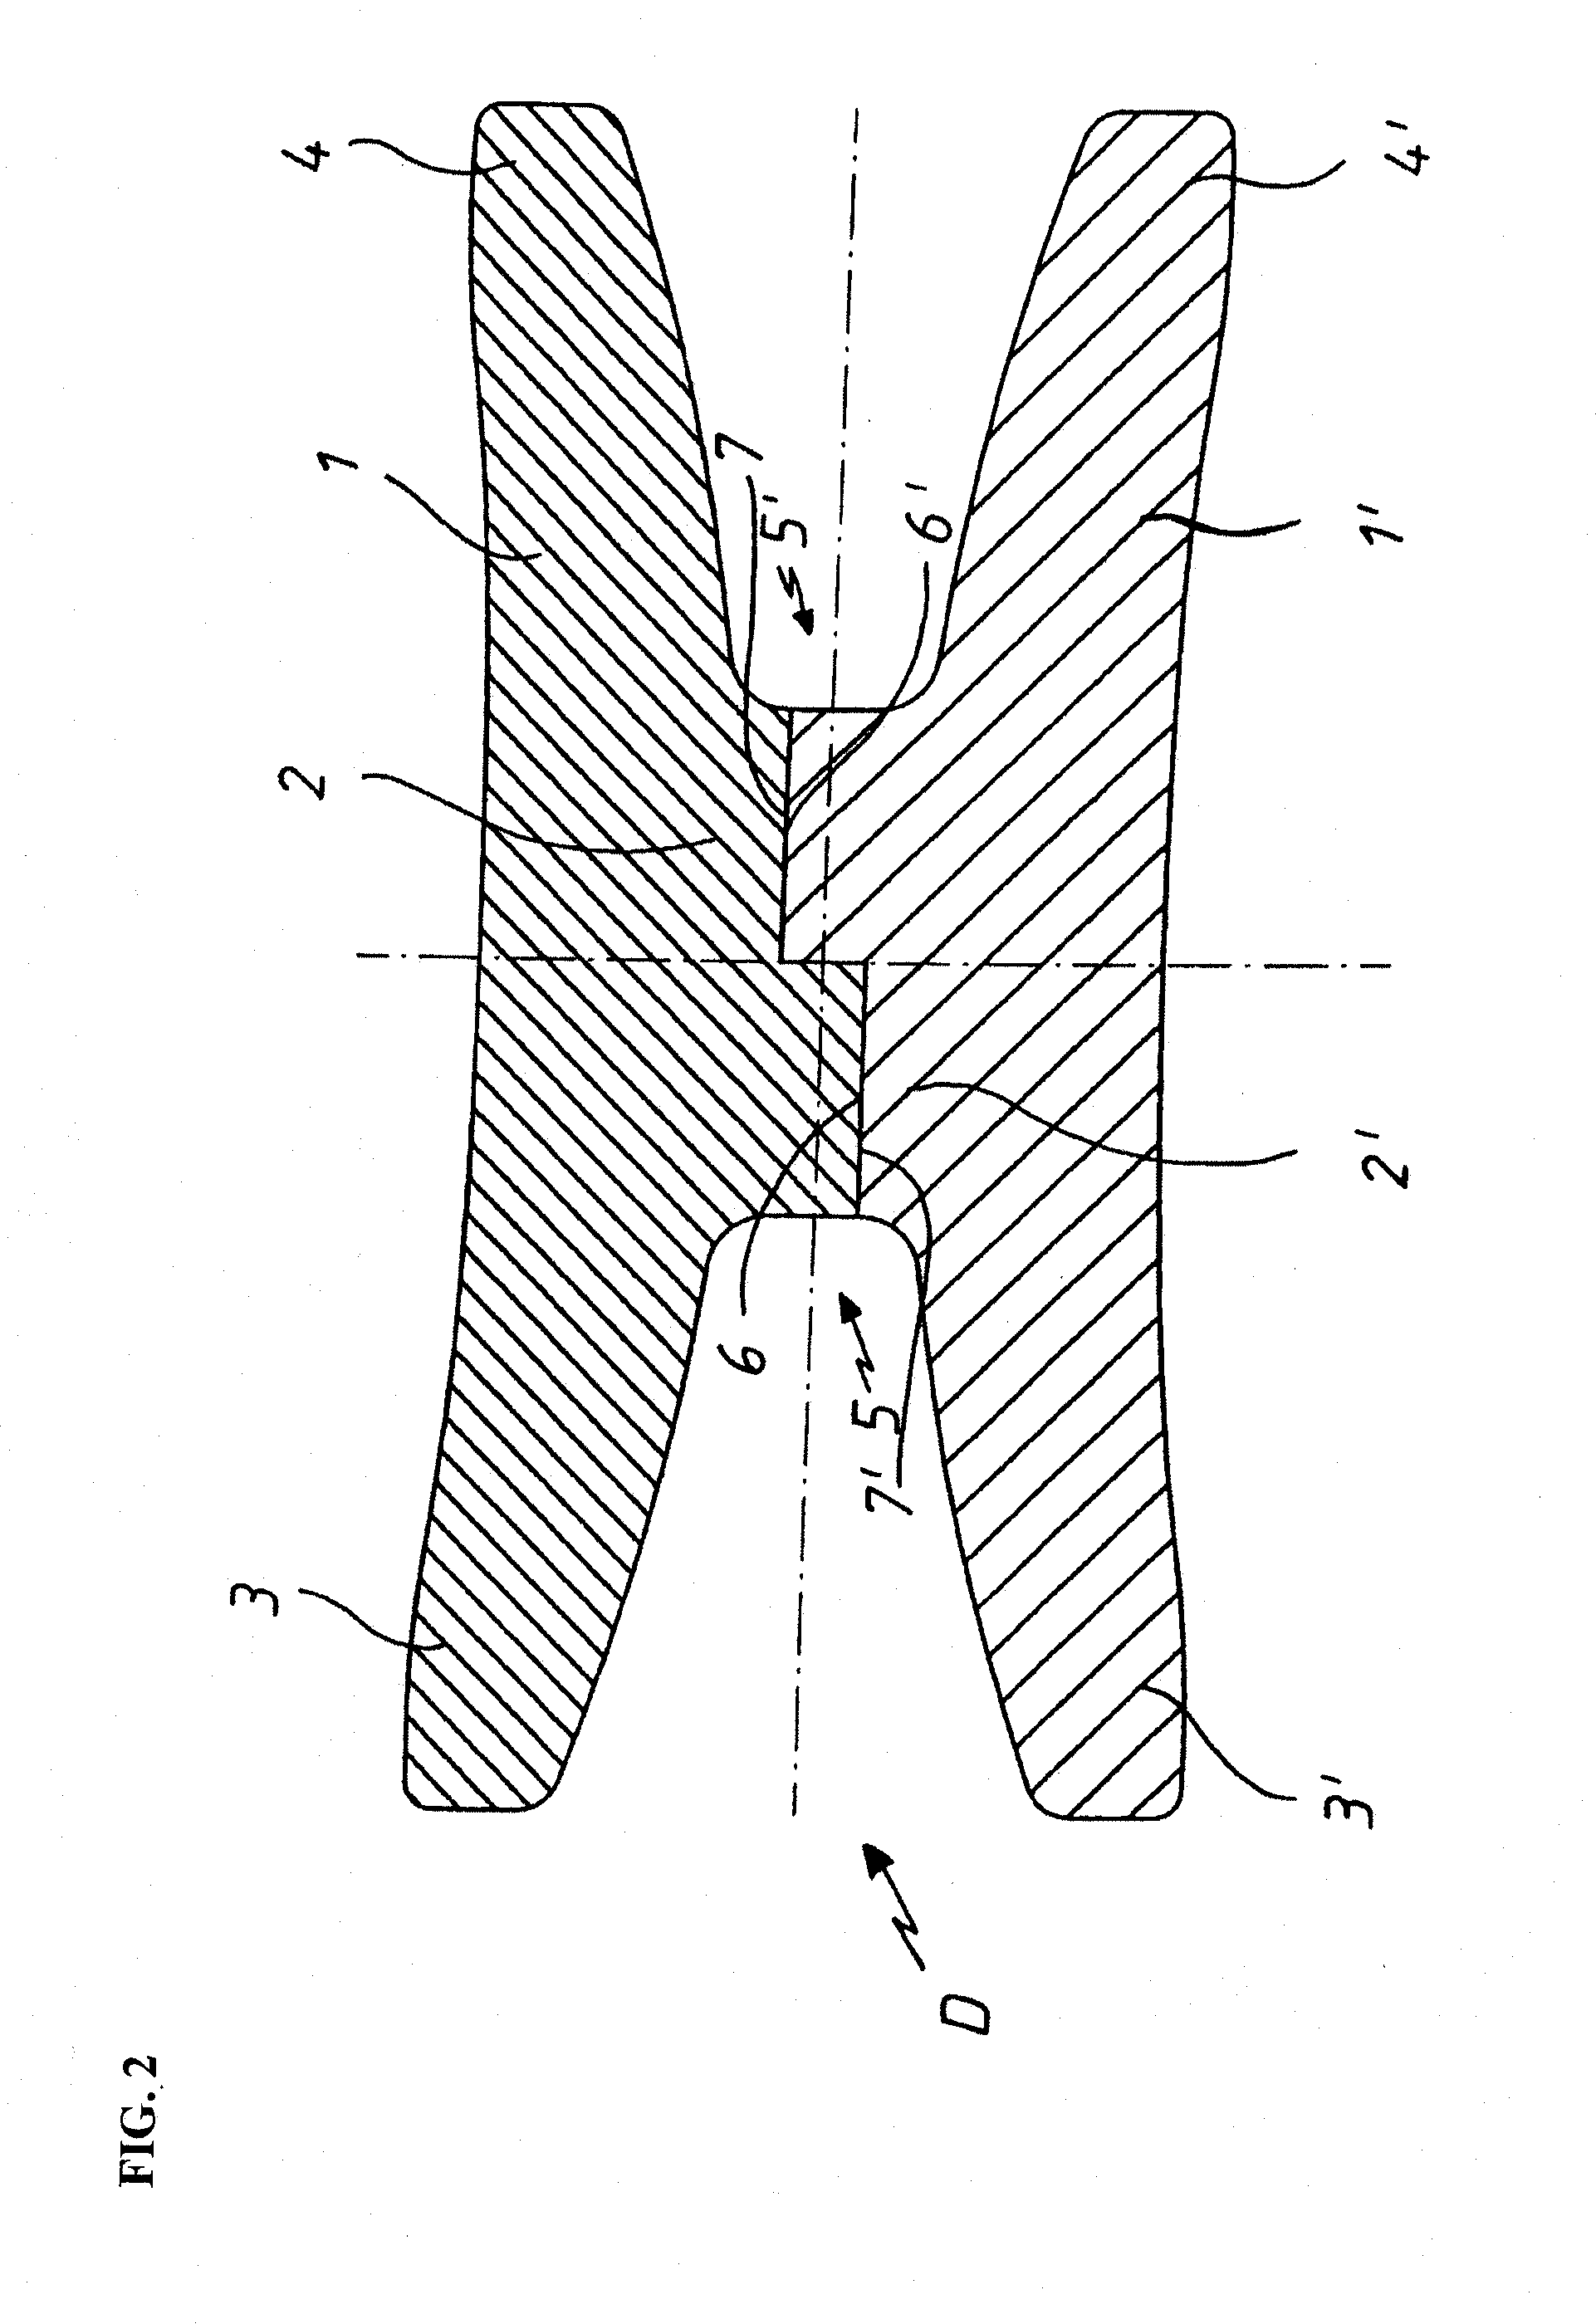 Sealing element for sealing flange surfaces on internal combustion engines